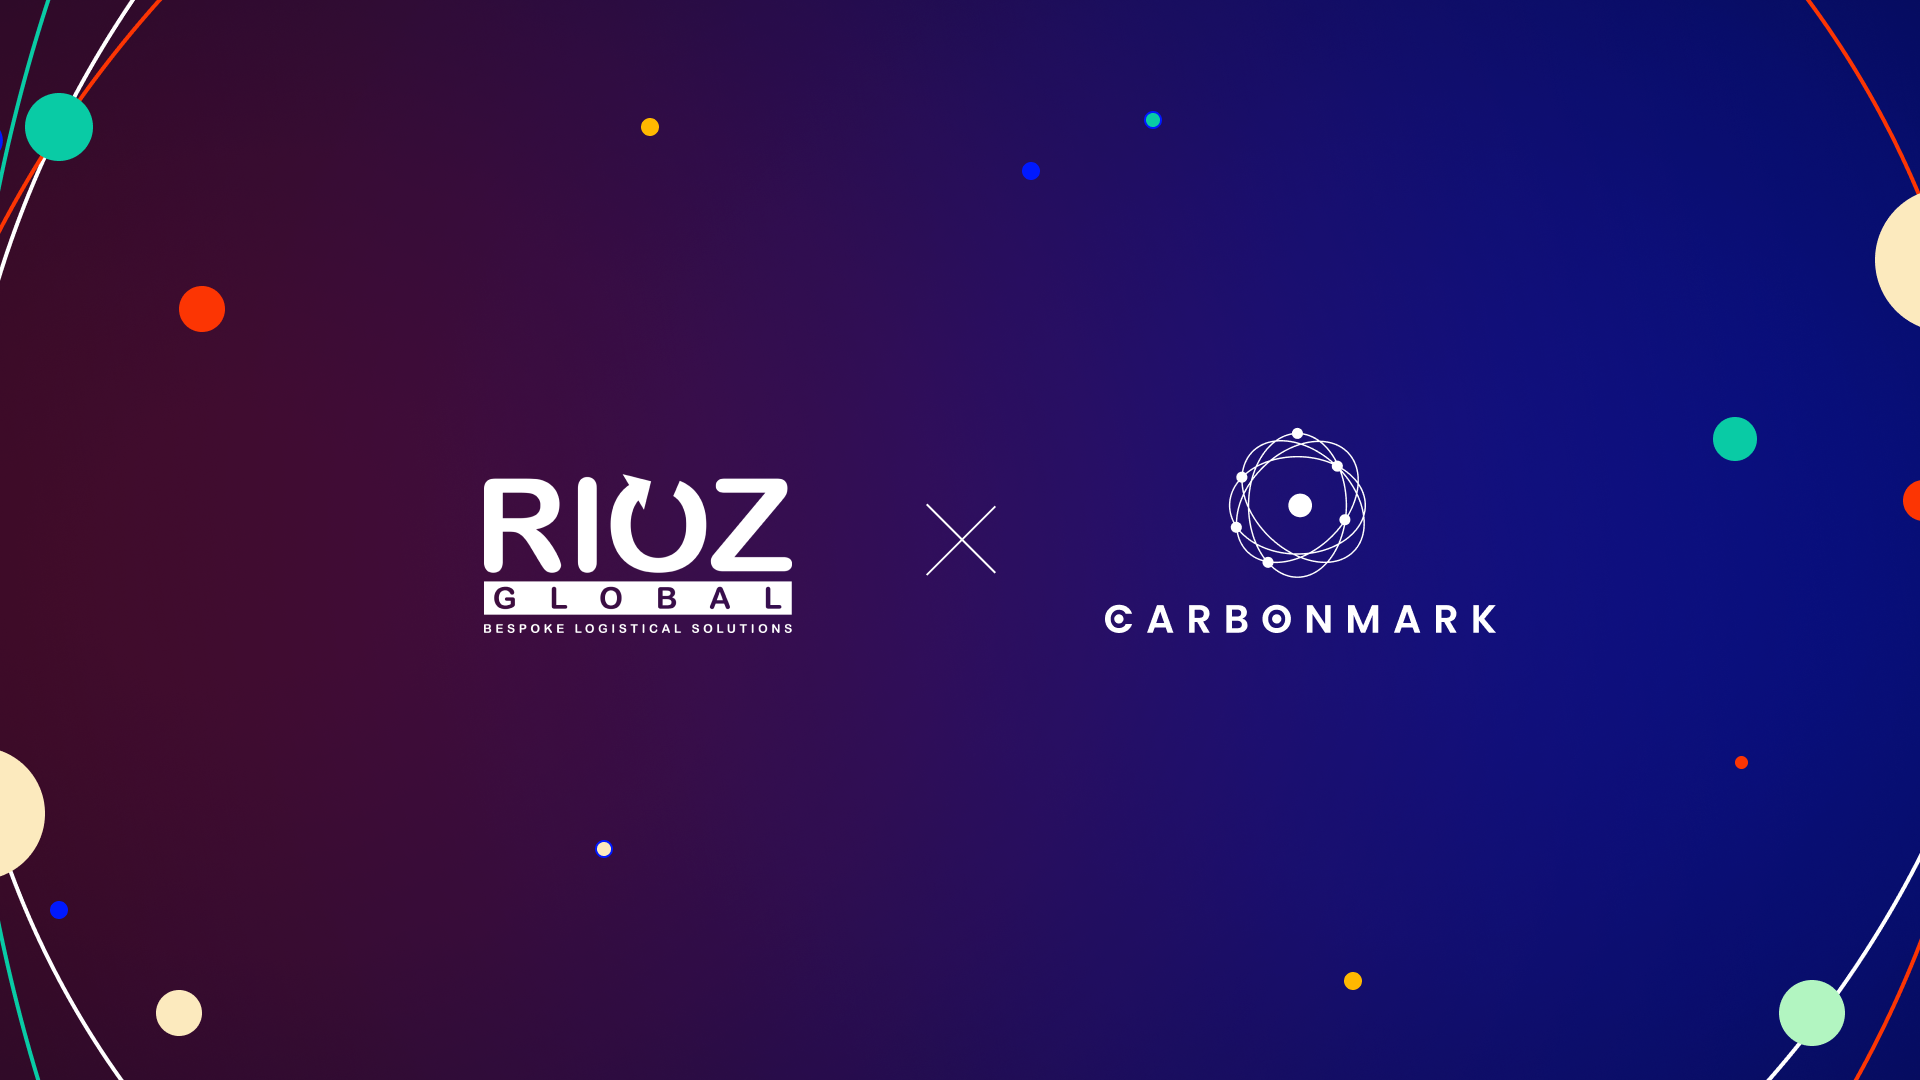  Rioz Global announces partnership with Carbonmark as part of Climate Strategy